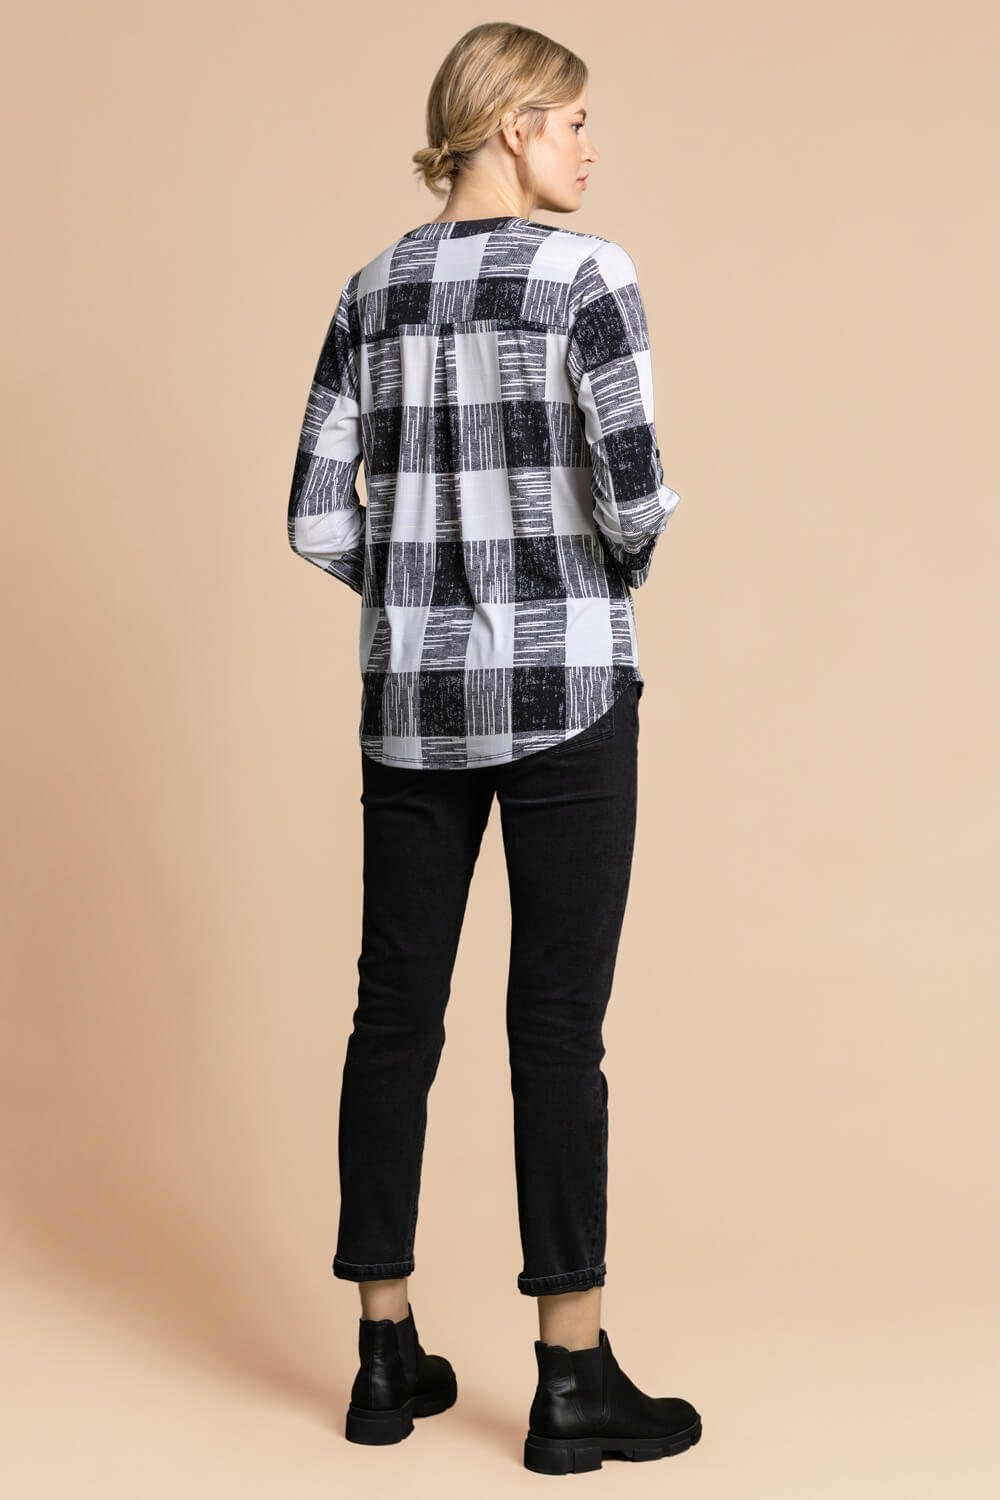 Black Textured Check Print Jersey Top, Image 2 of 5